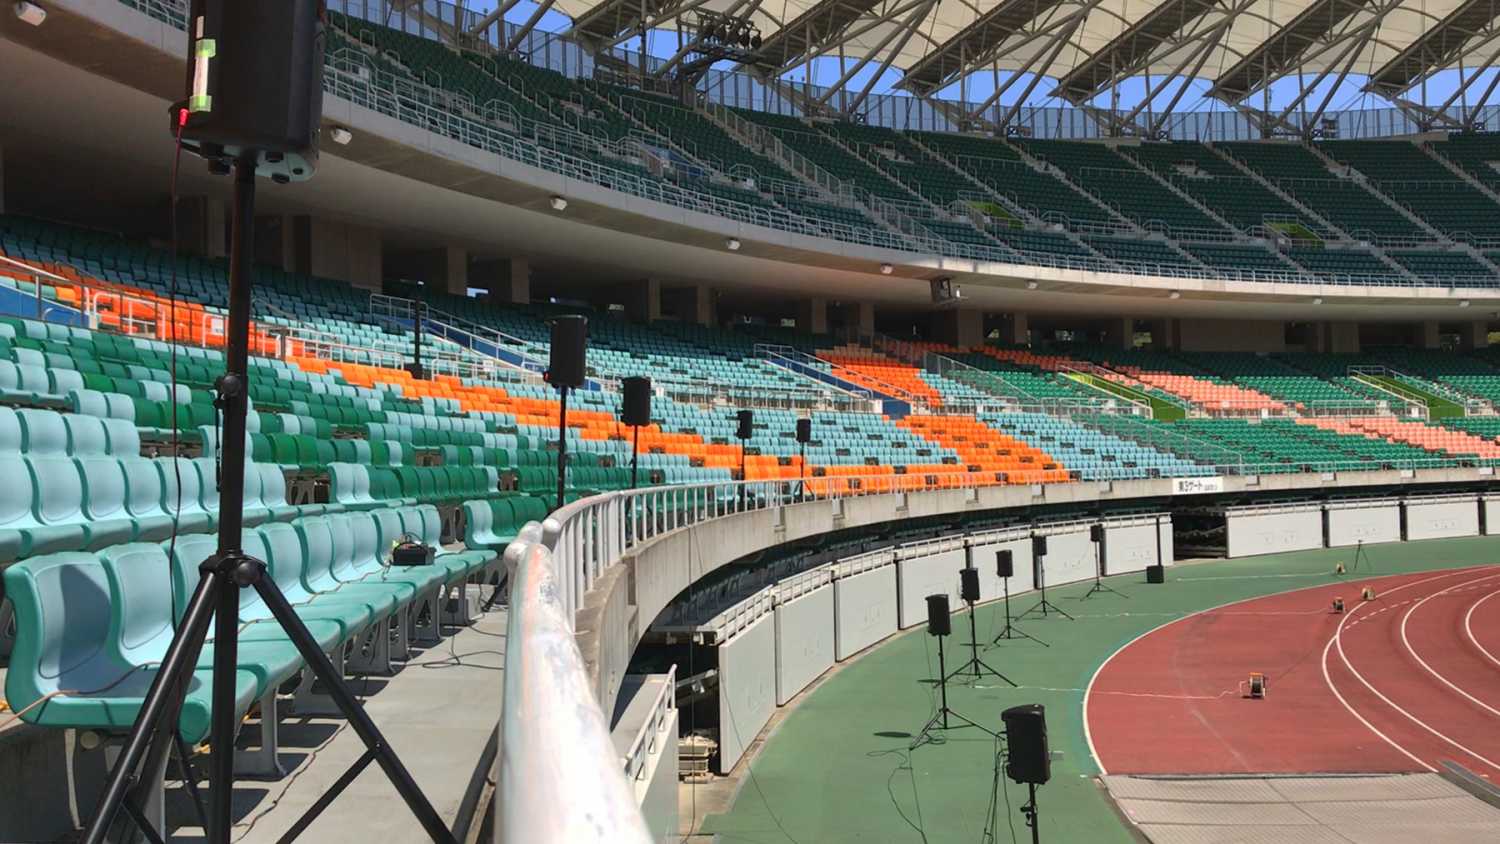 The system’s usability was tested by placing 58 speaker units around Shizuoka Stadium